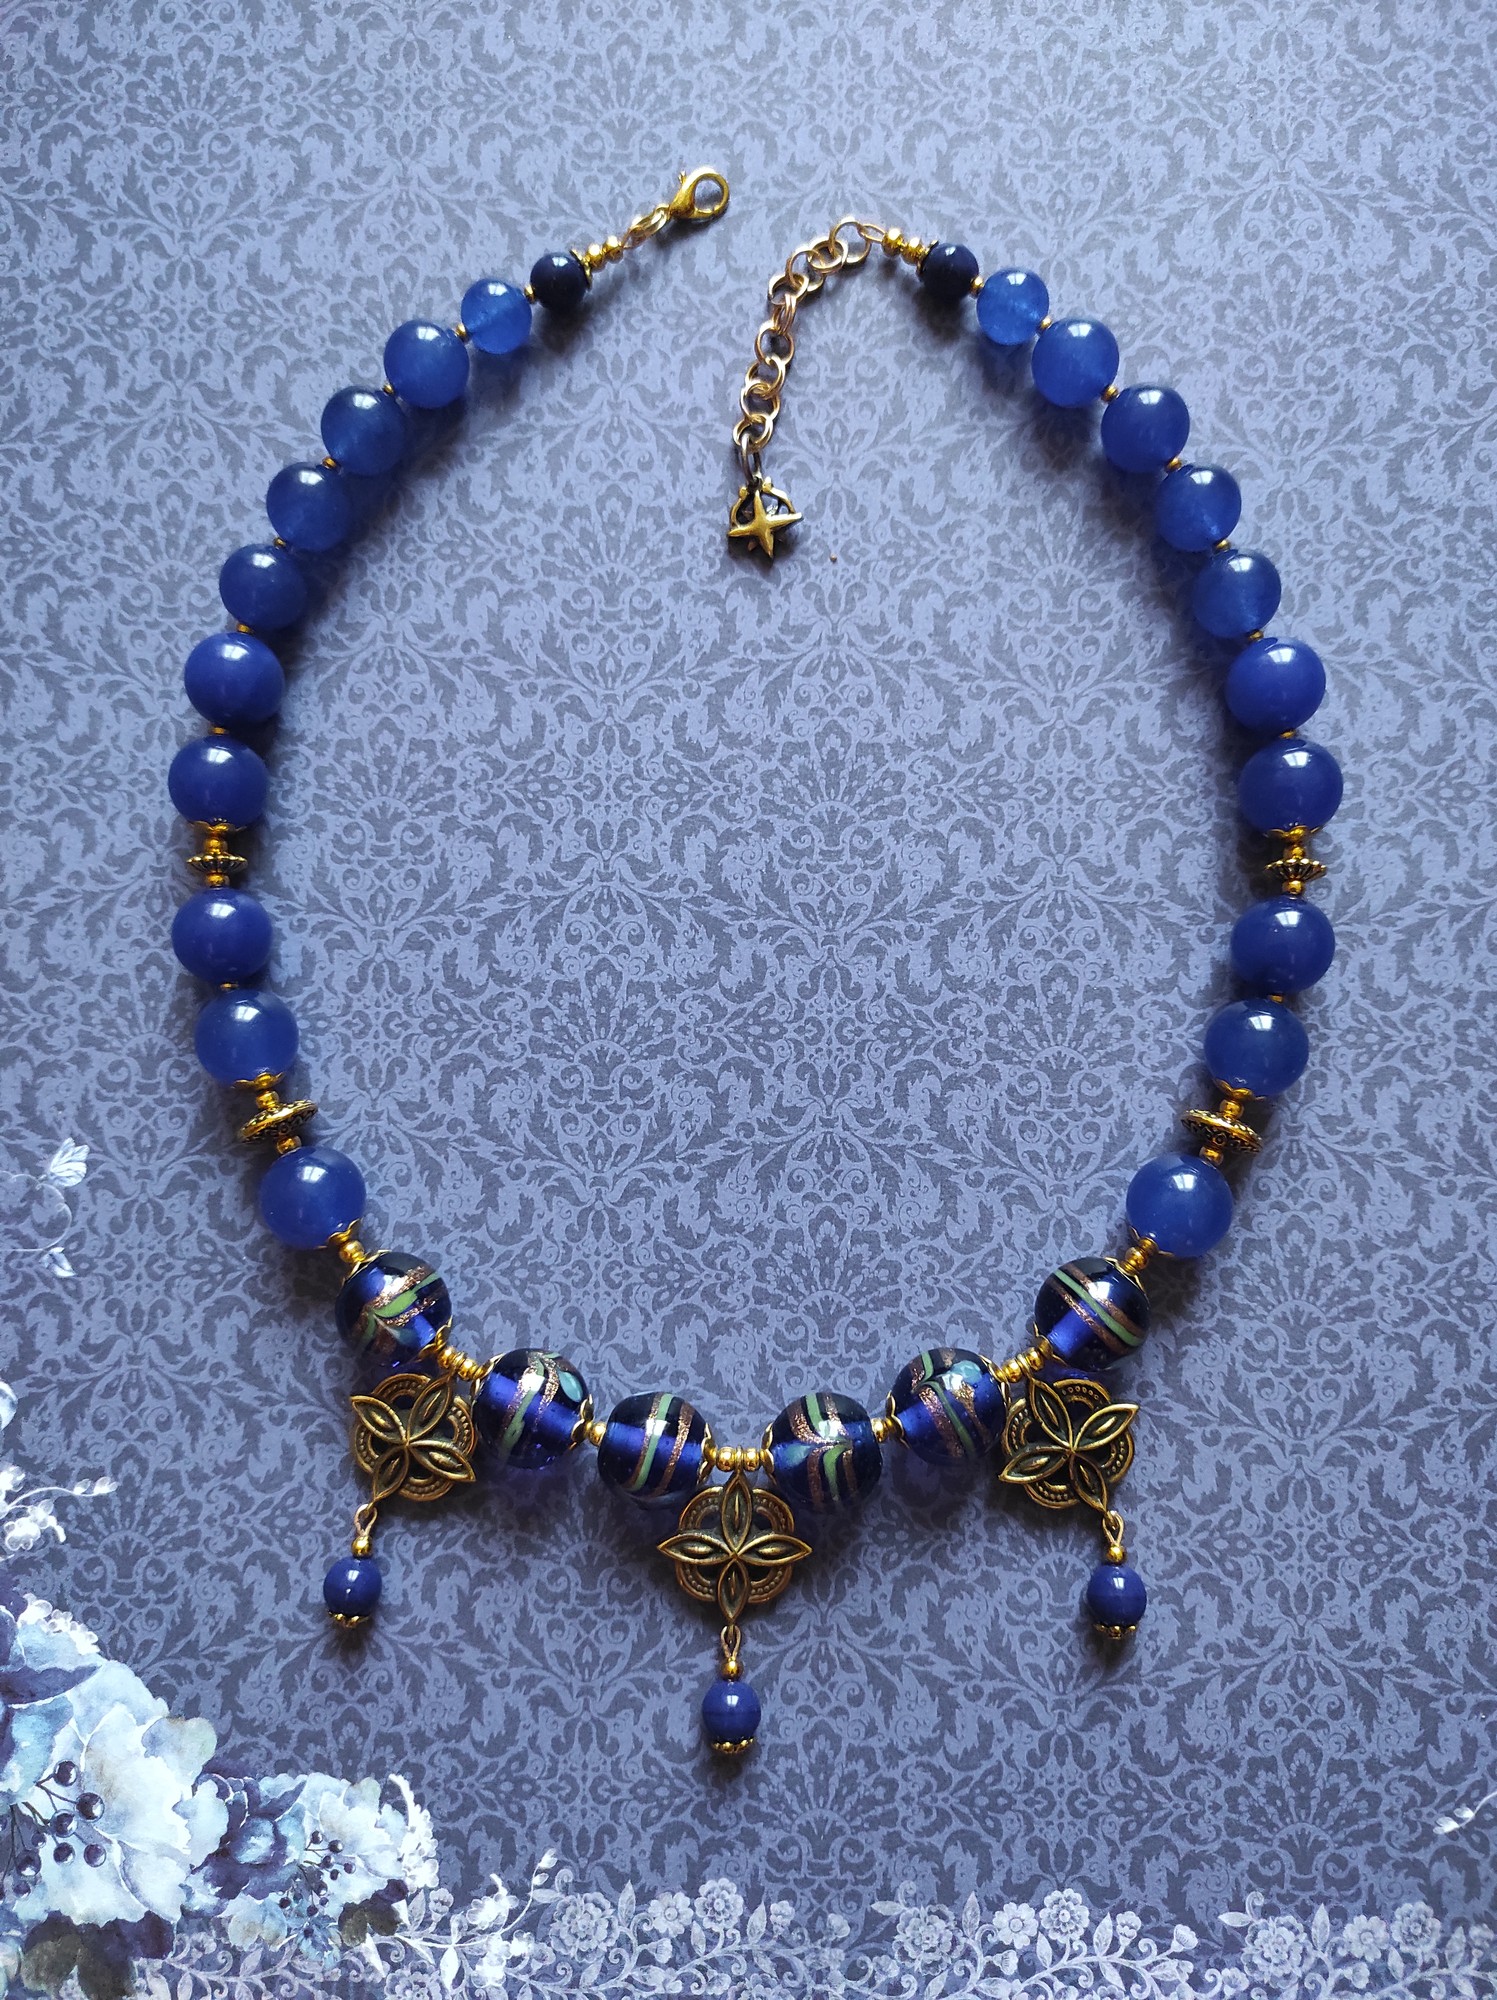 Necklace "Starry sky" from glass and chalcedony